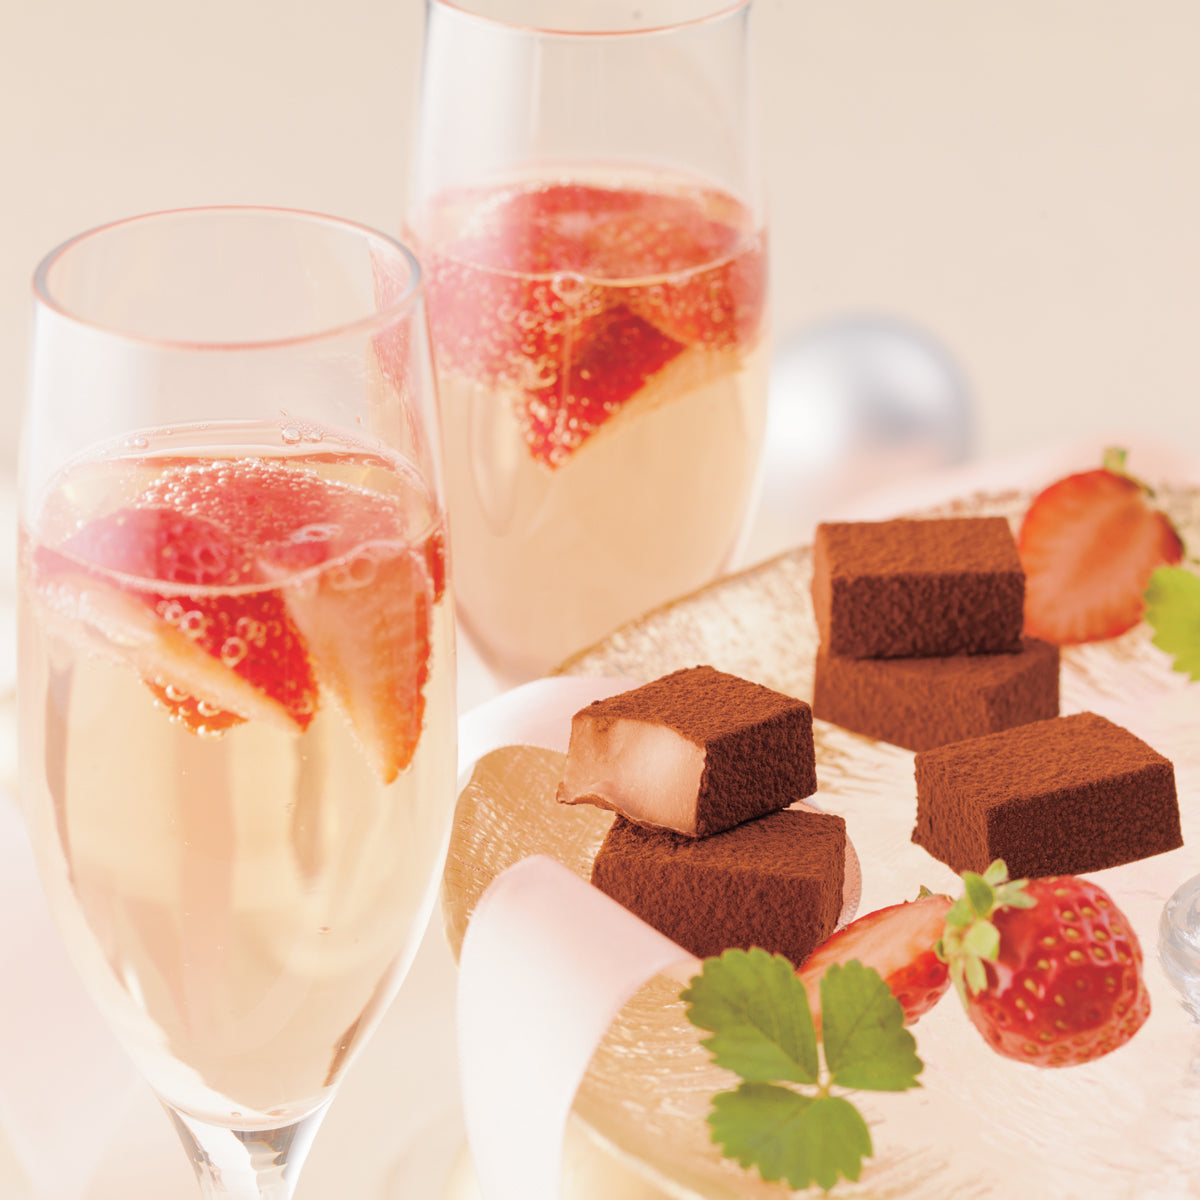 Image shows brown chocolate blocks on a clear plate with red strawberries and green leaves with white ribbon. Accents include champagne glasses filled with champagne and red strawberries. Background is in flesh color with a blurry picture of a white ball.